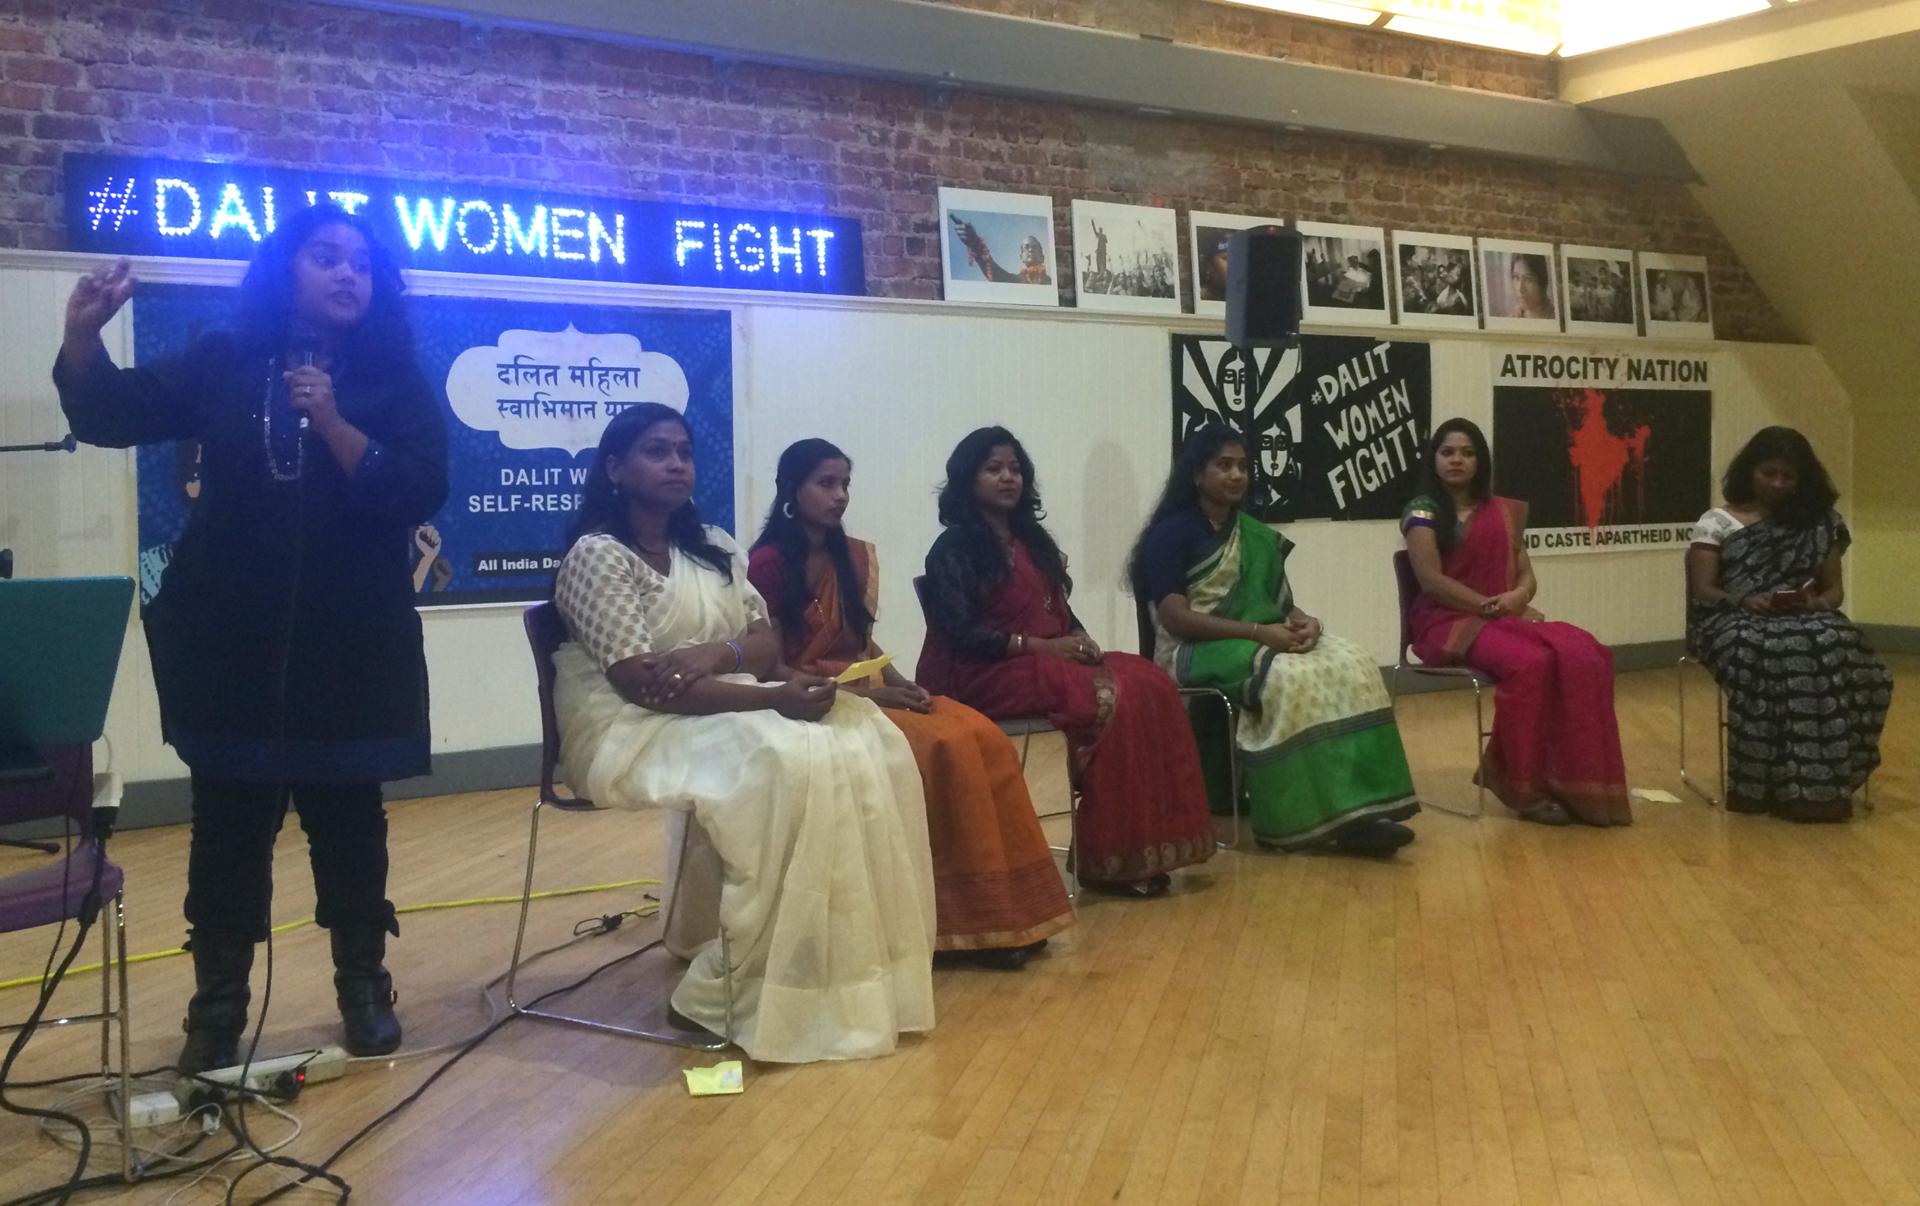 All Dalit Women's Rights Forum